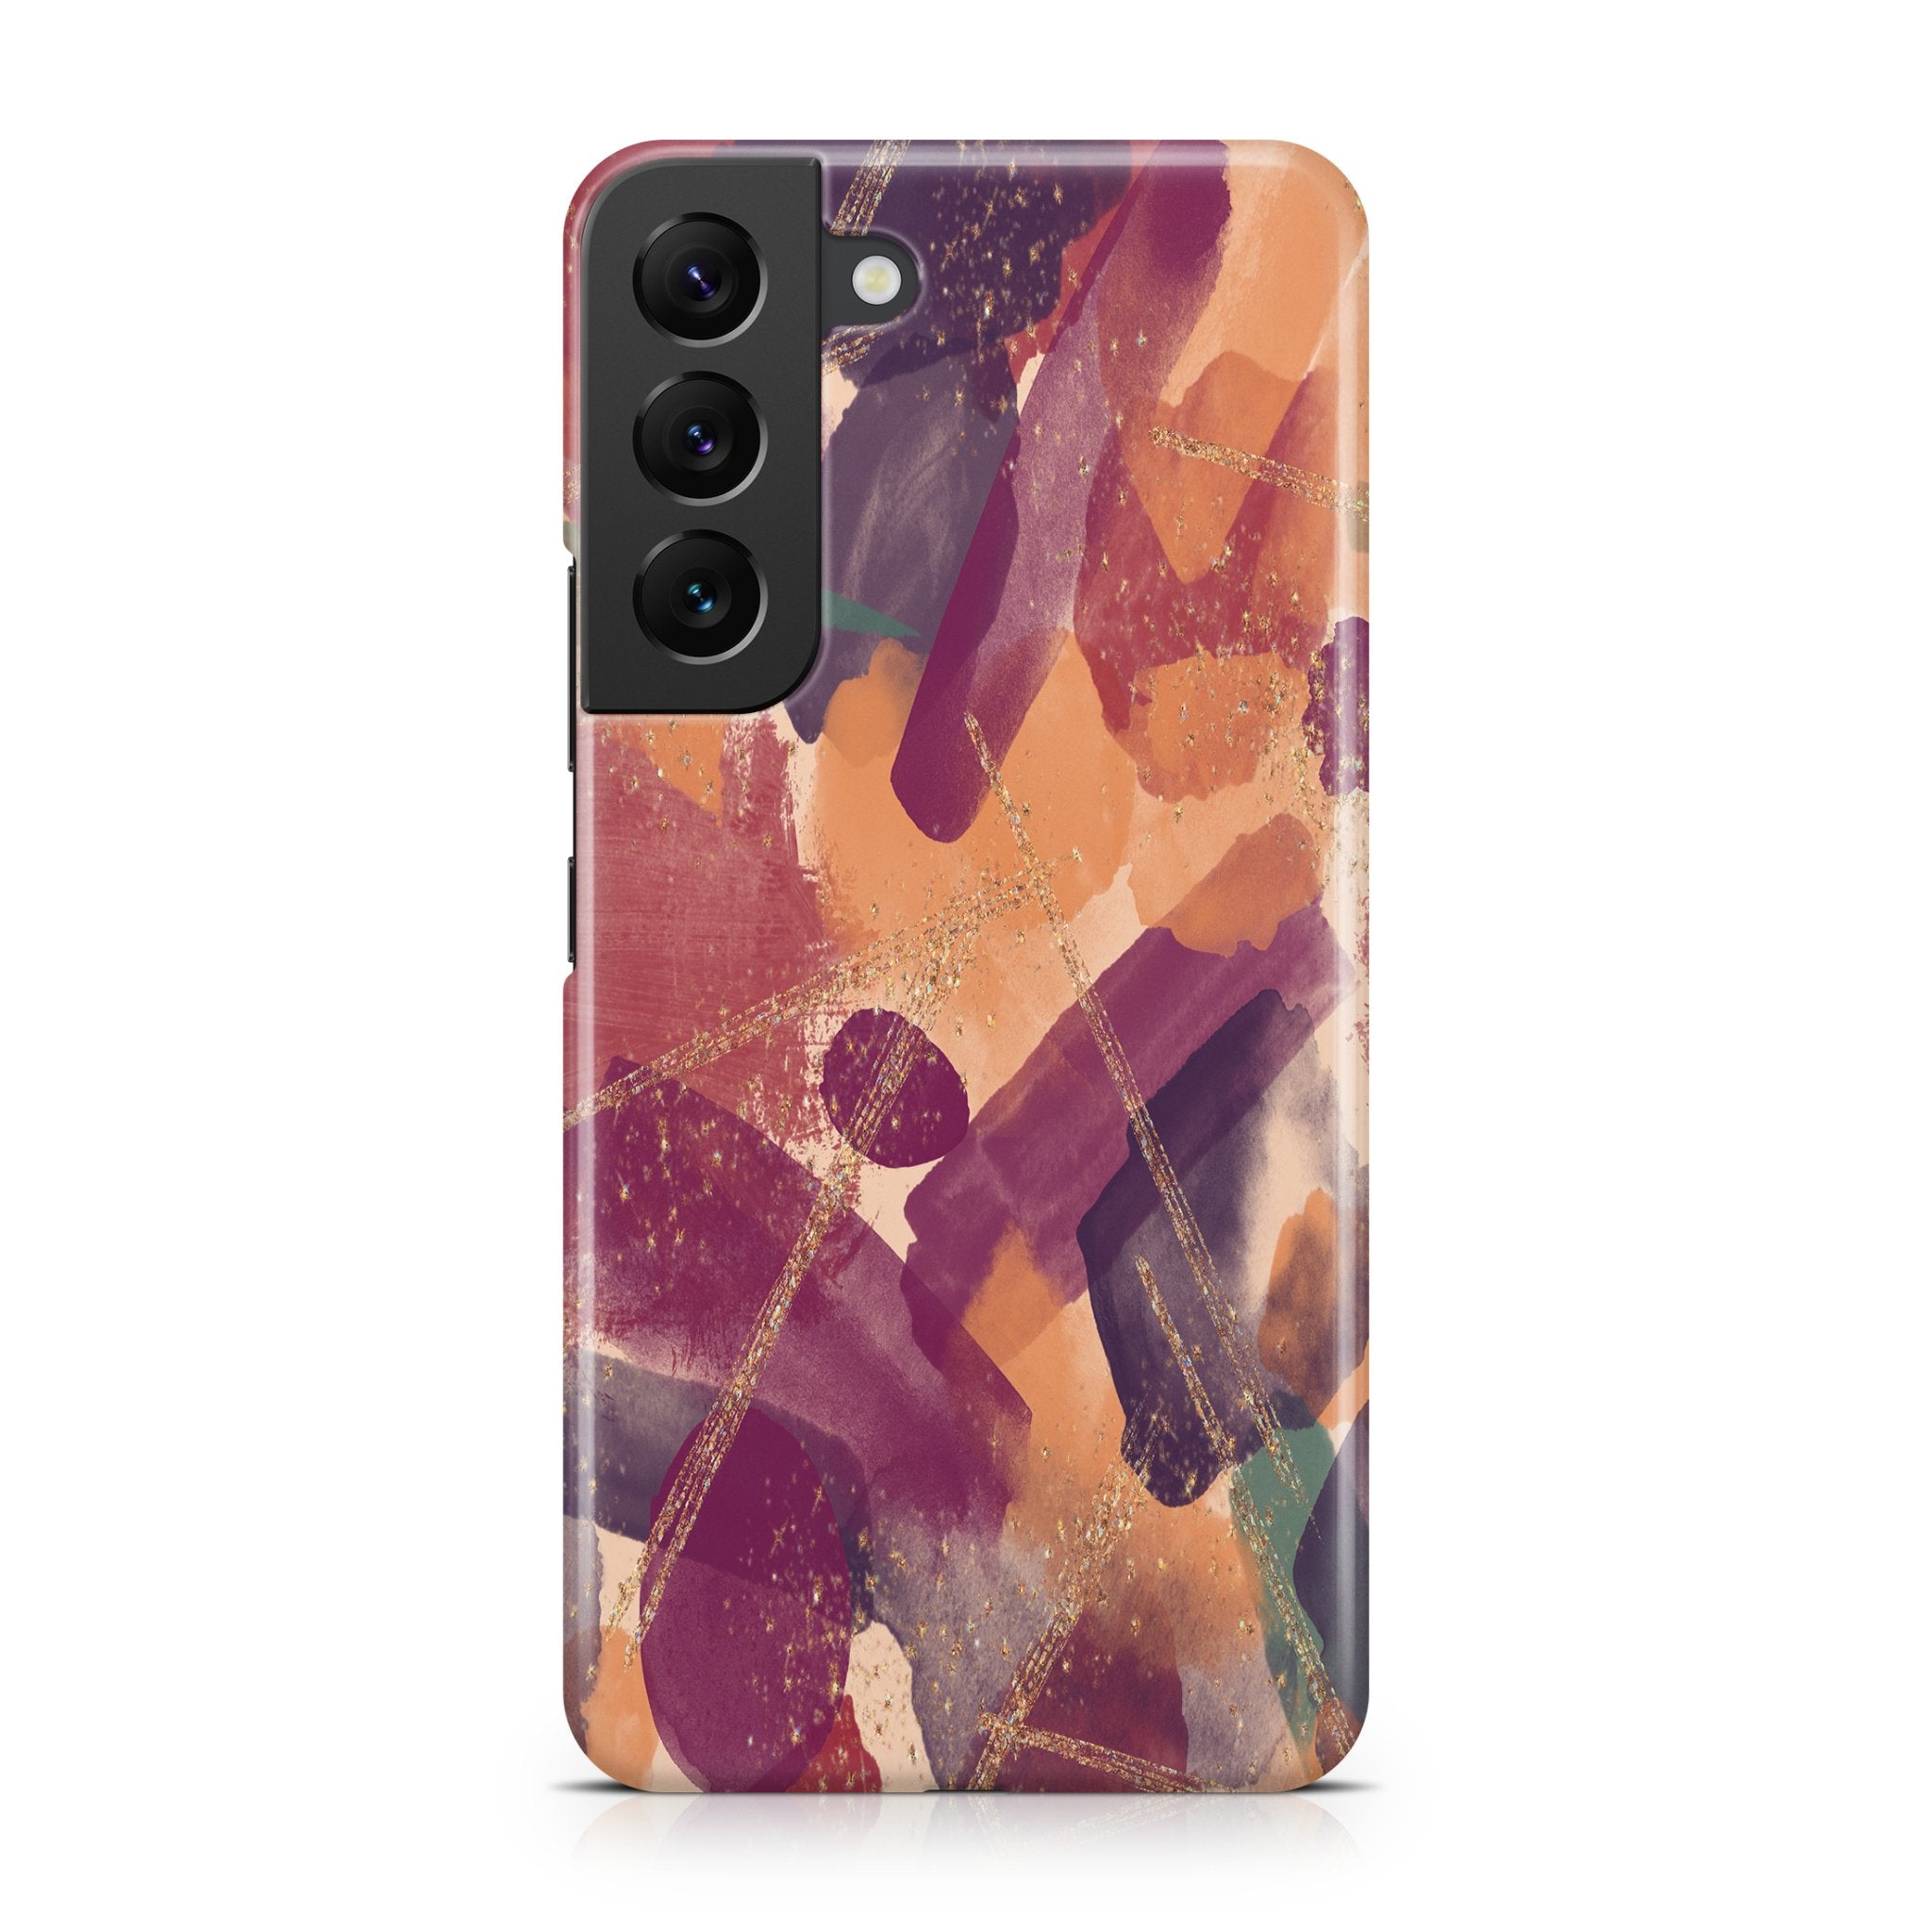 Fall Colors - Samsung phone case designs by CaseSwagger